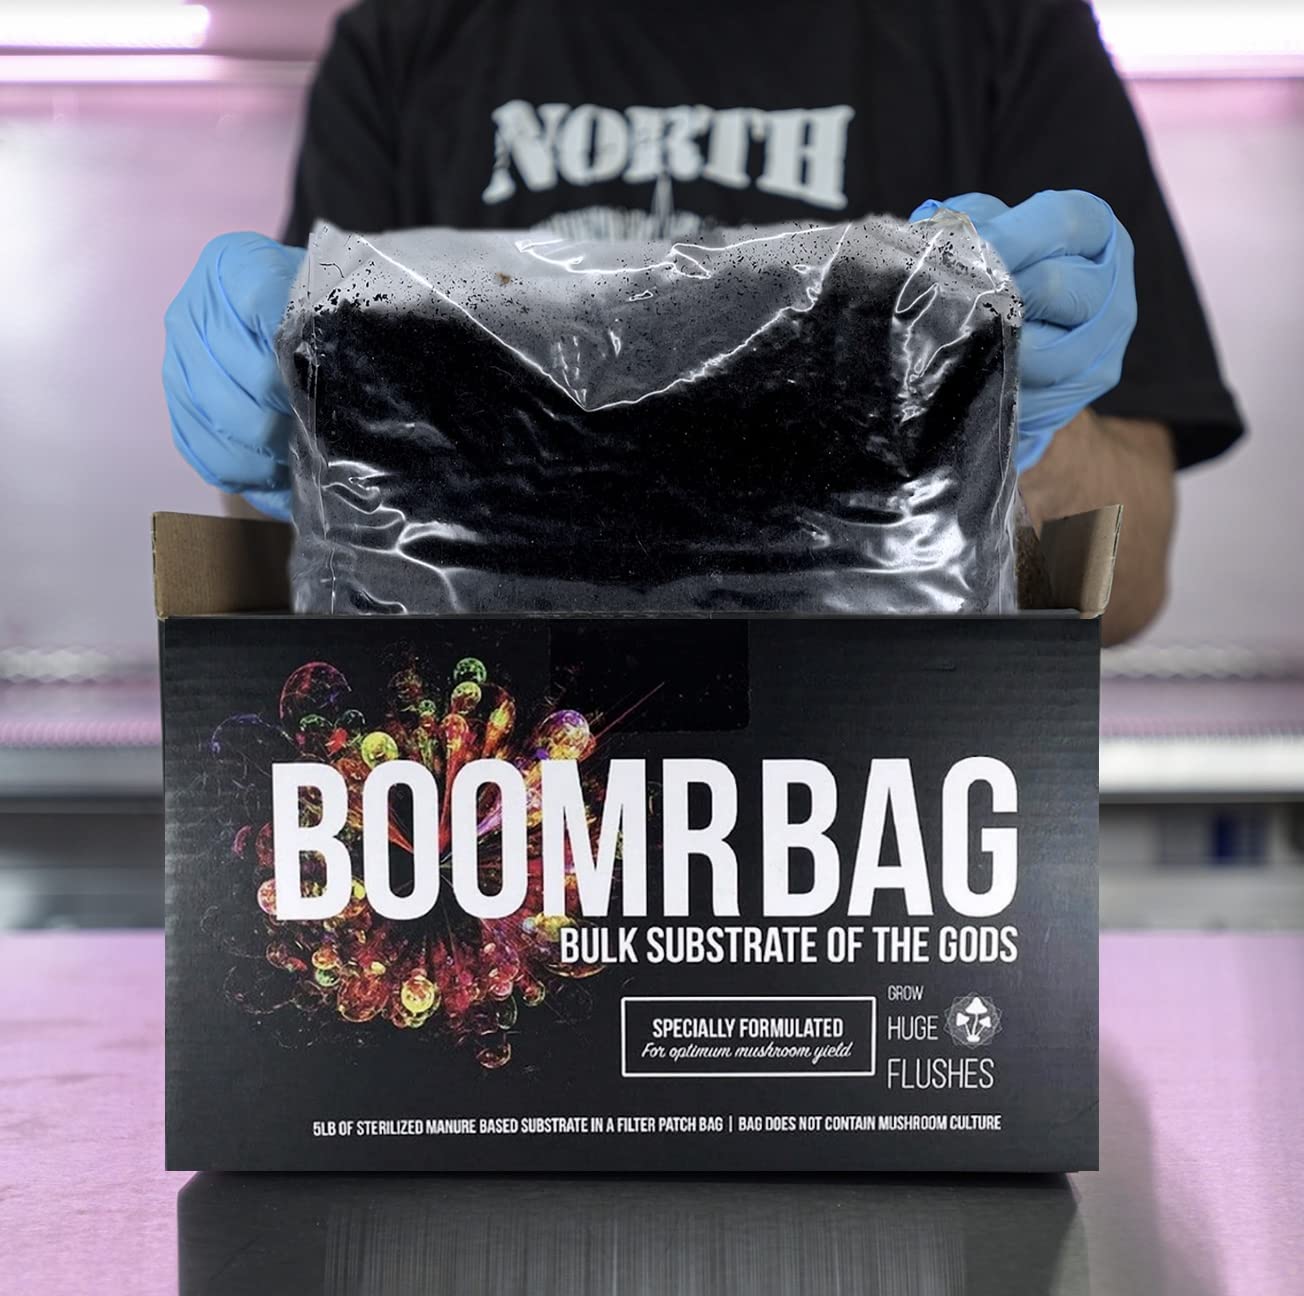 North Spore 'Boomr Bag' (5 lbs) Sterile Manure-Based Bulk Mushroom Substrate | Premium Horse Manure Blend | Grow Bigger Flushes w/ Maximum Yield Formula | Handmade by Expert Mycologists in Maine, USA